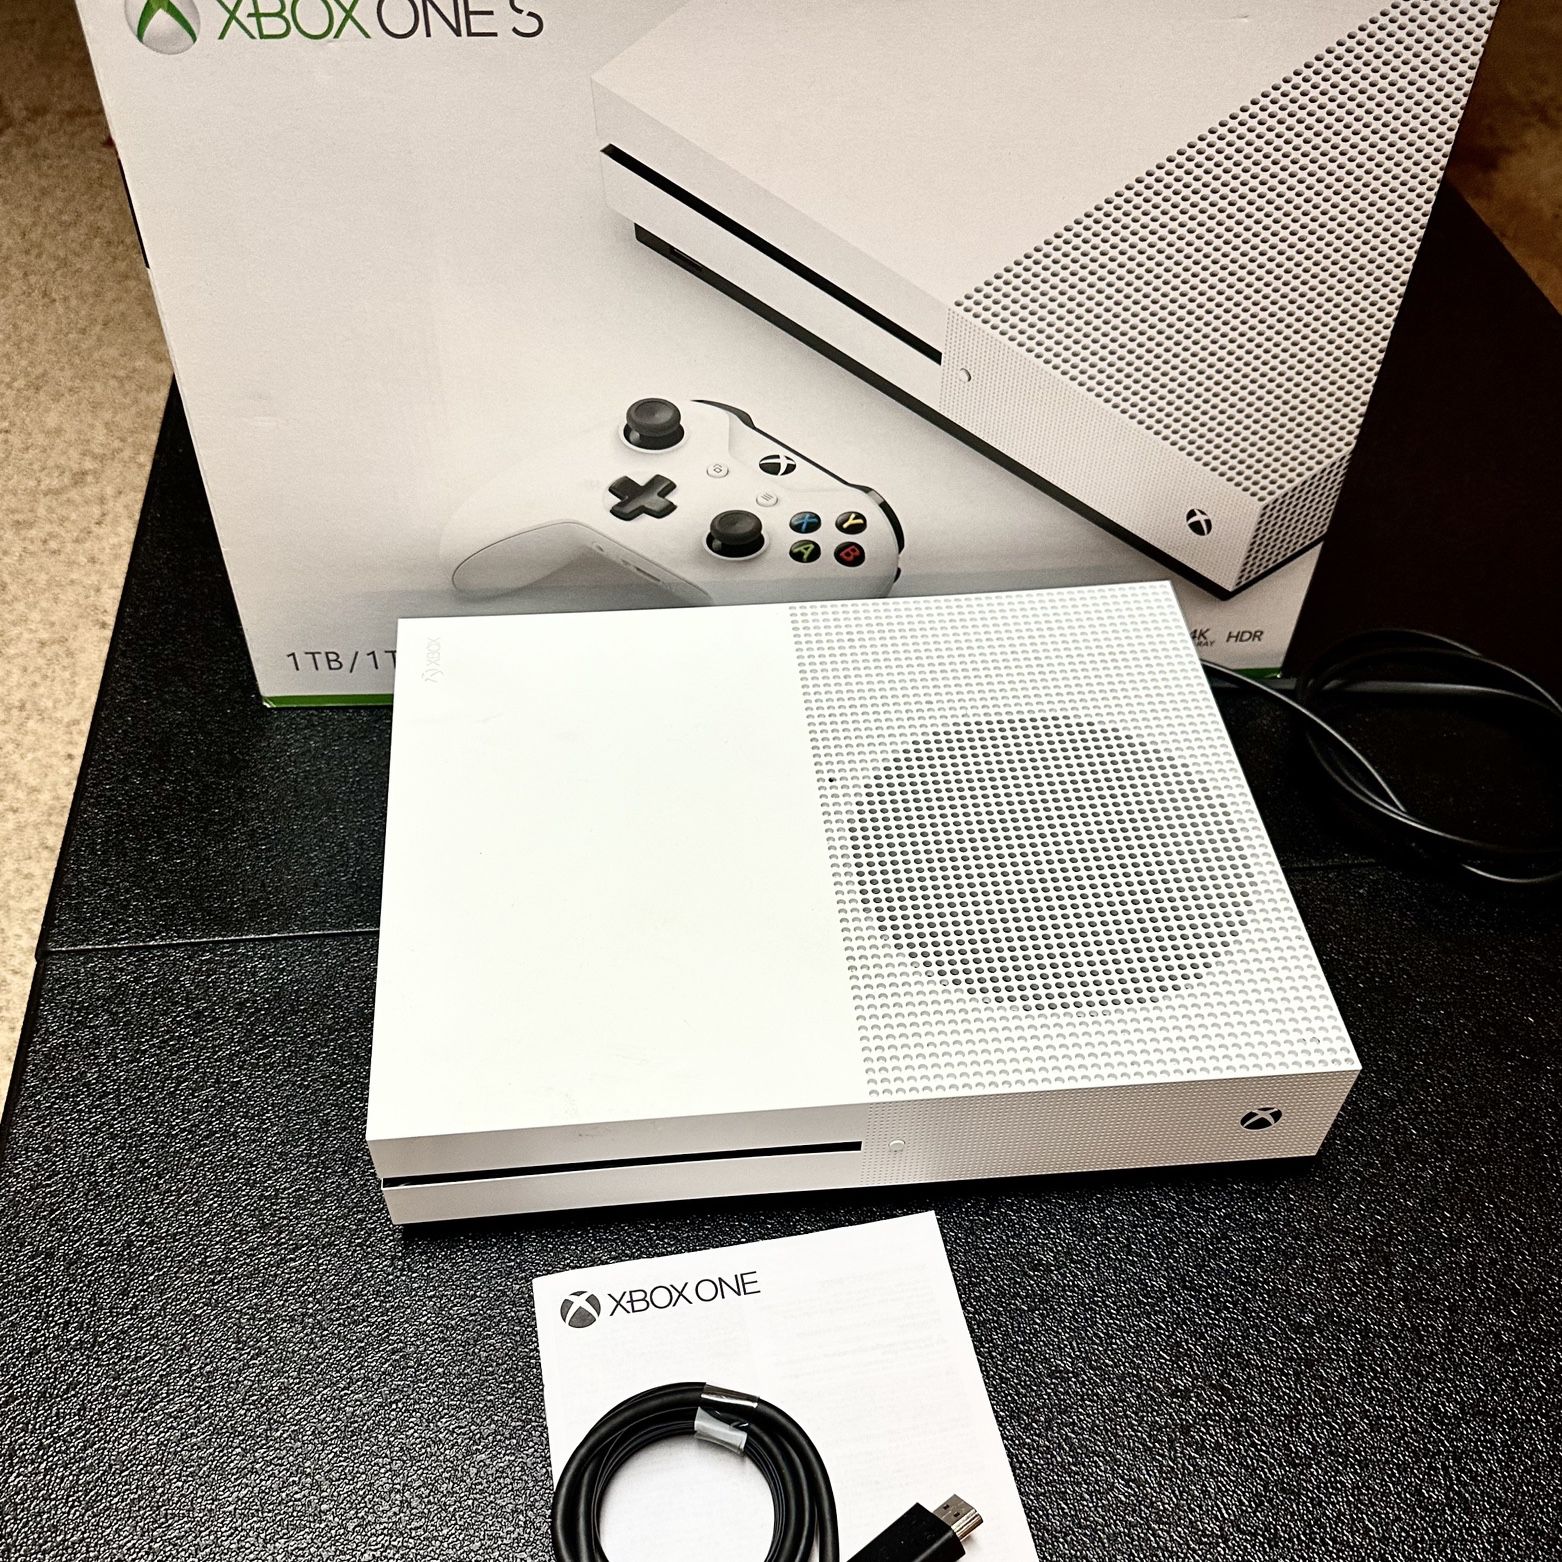 Xbox One S - Fully Tested - Works Perfectly